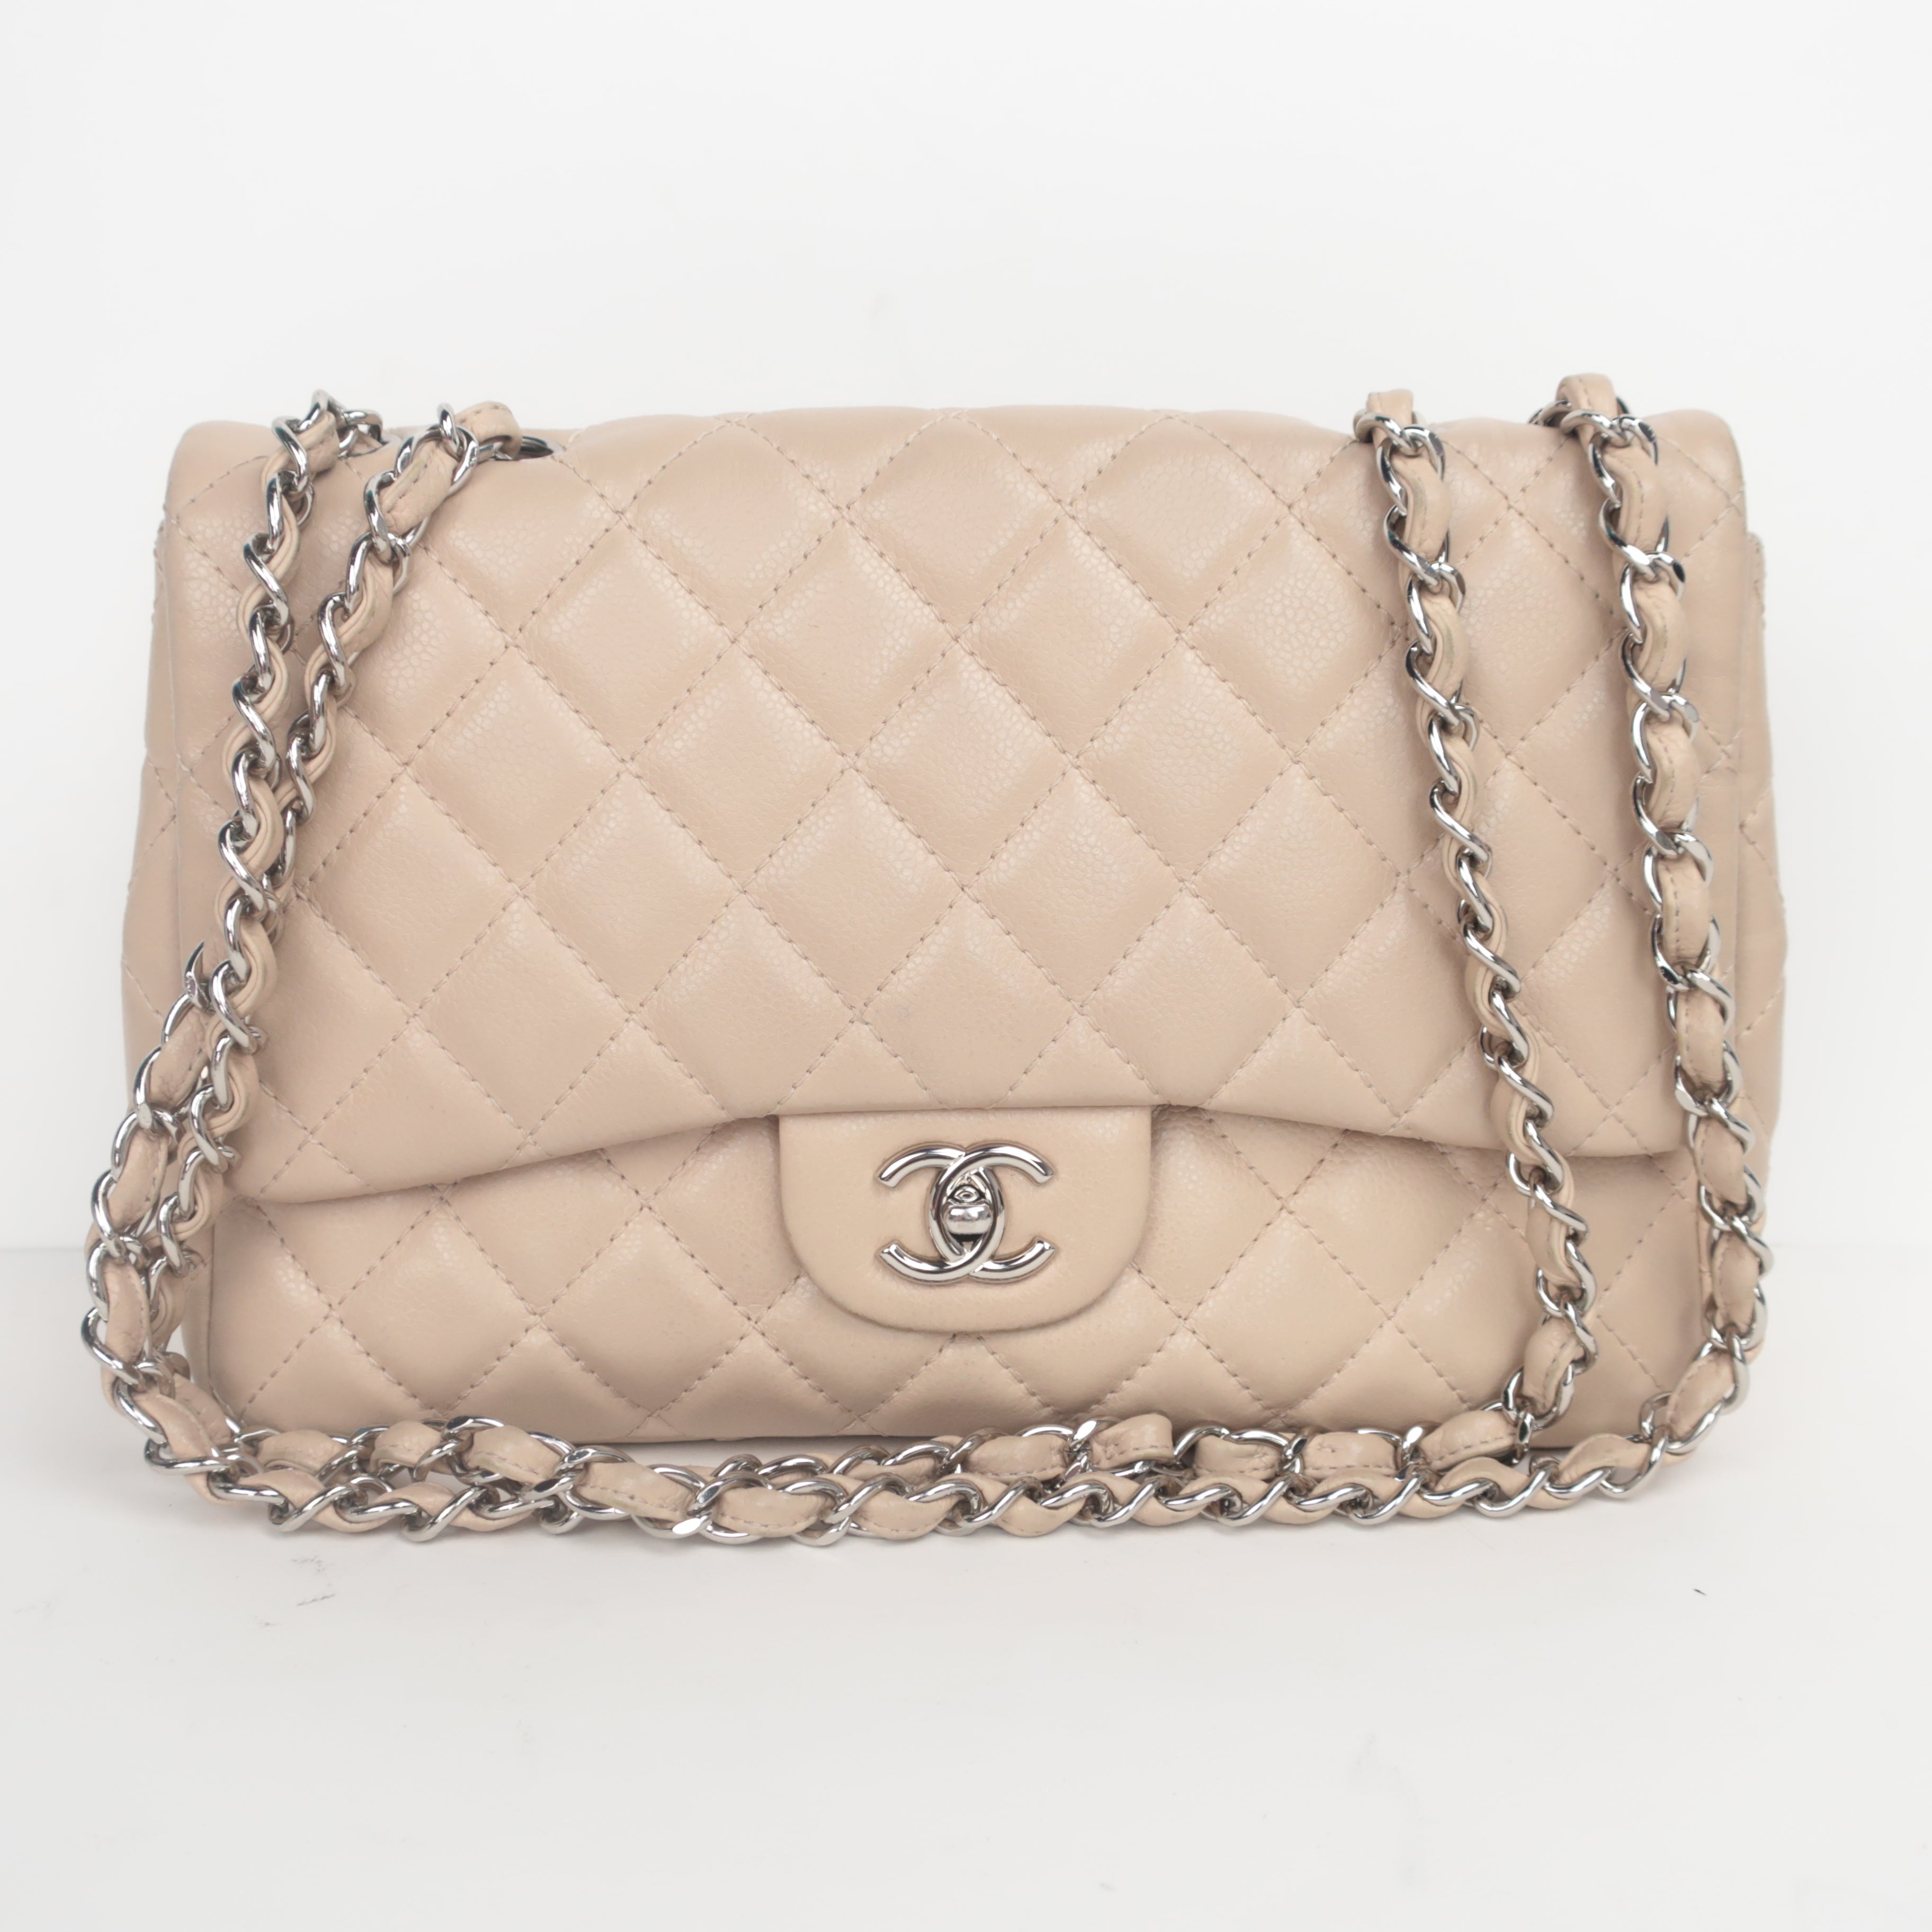 Which Chanel Bag to Buy First? Top 3 Most Iconic Chanel Bags